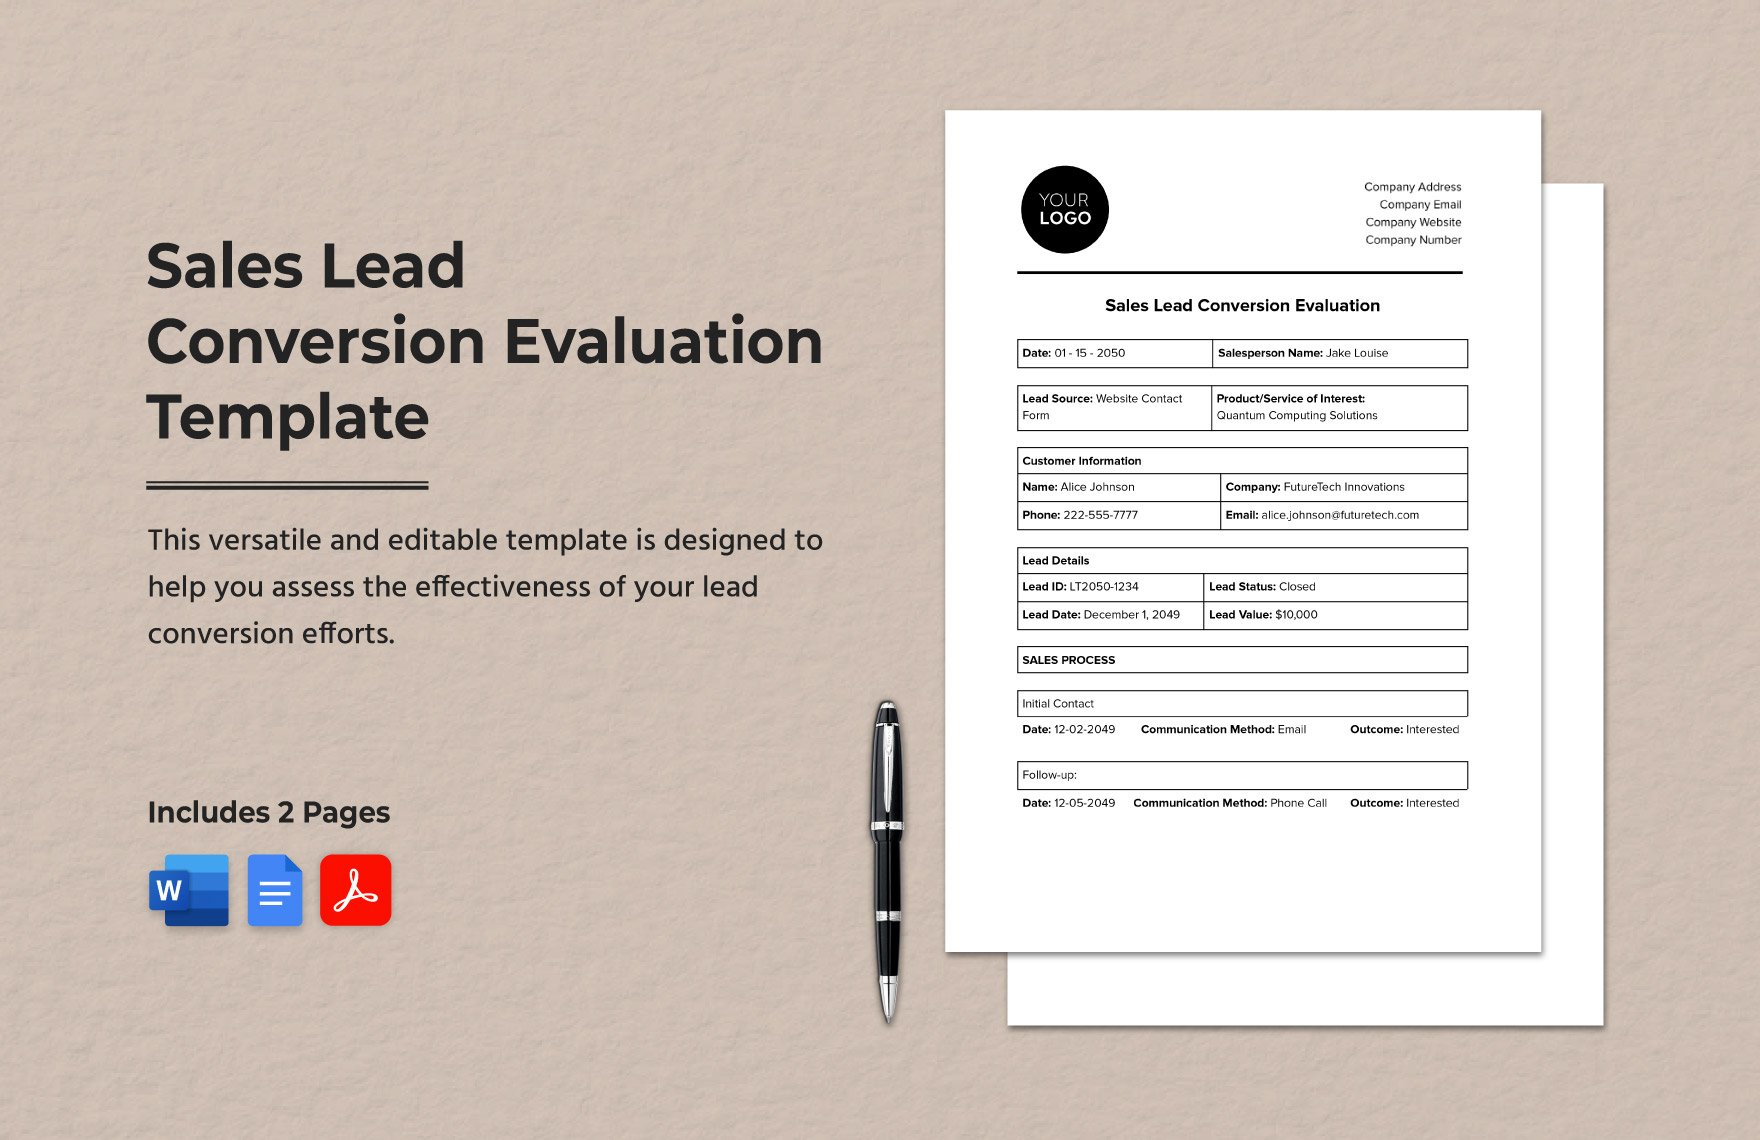 Sales Lead Conversion Evaluation Template in Word, Google Docs, PDF